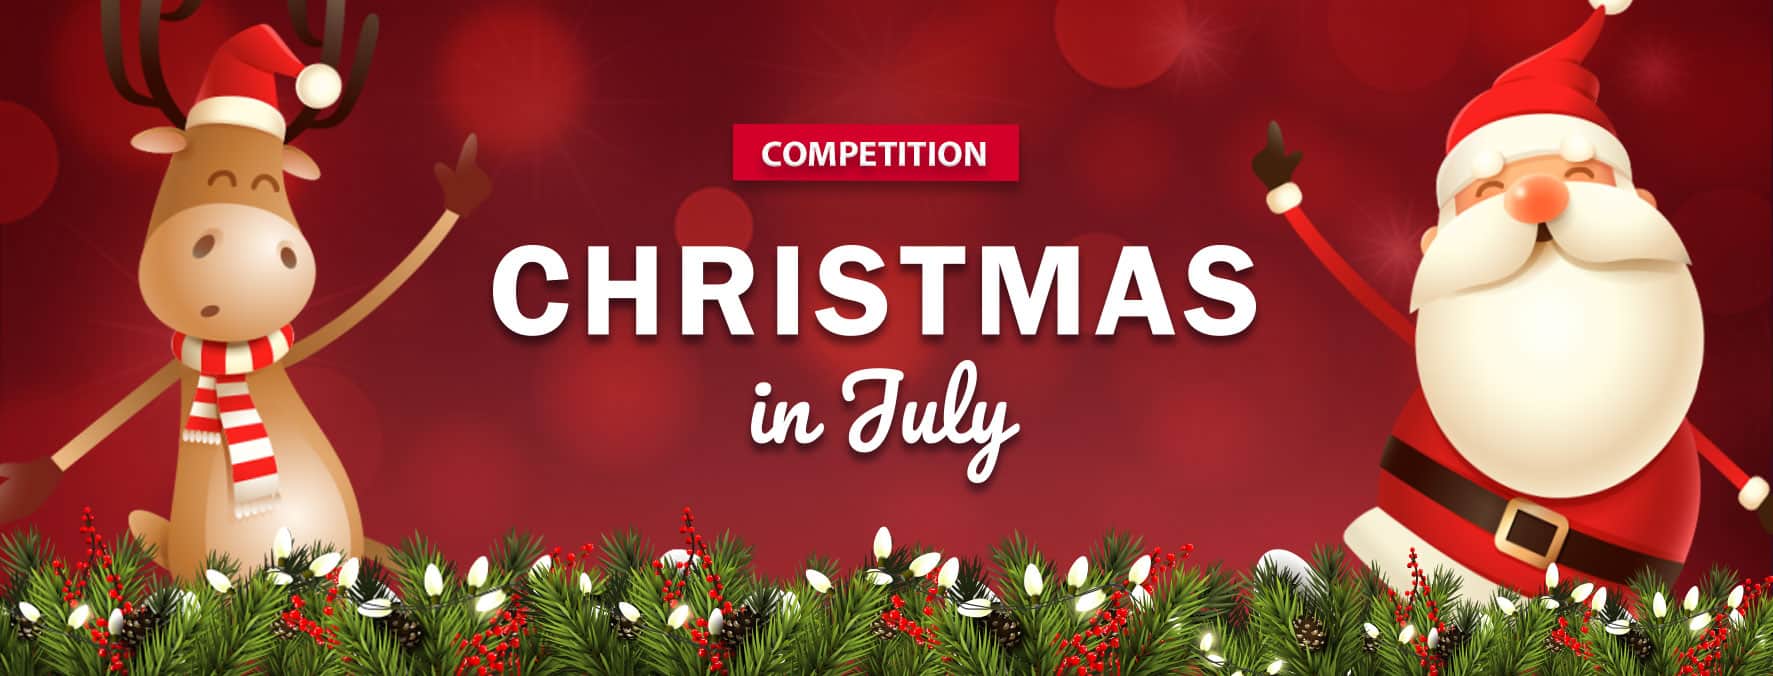 christmas in july comp page banner